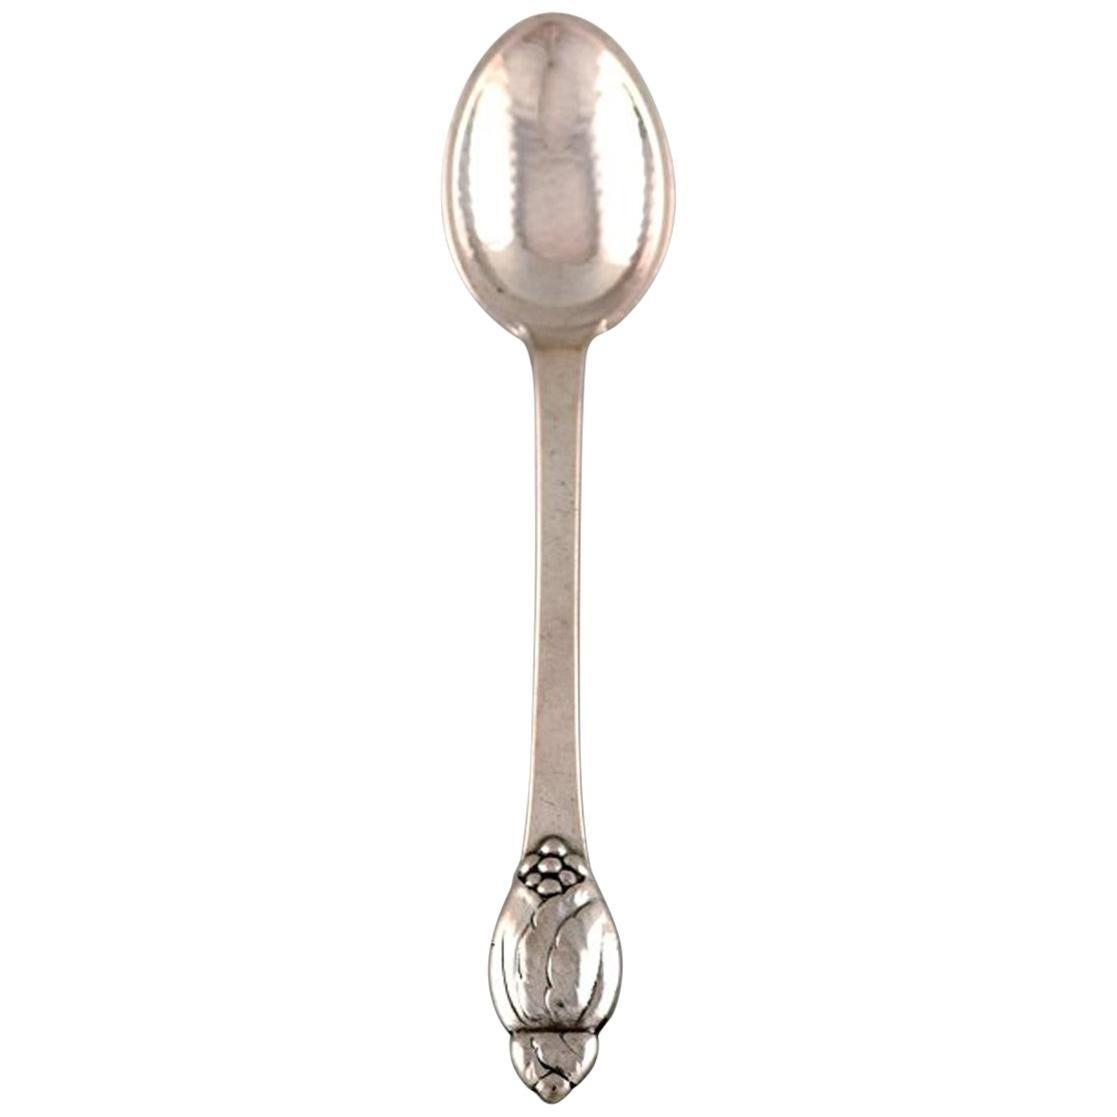 Evald Nielsen number 6, coffee spoon in all silver. 1920's. Ten pieces